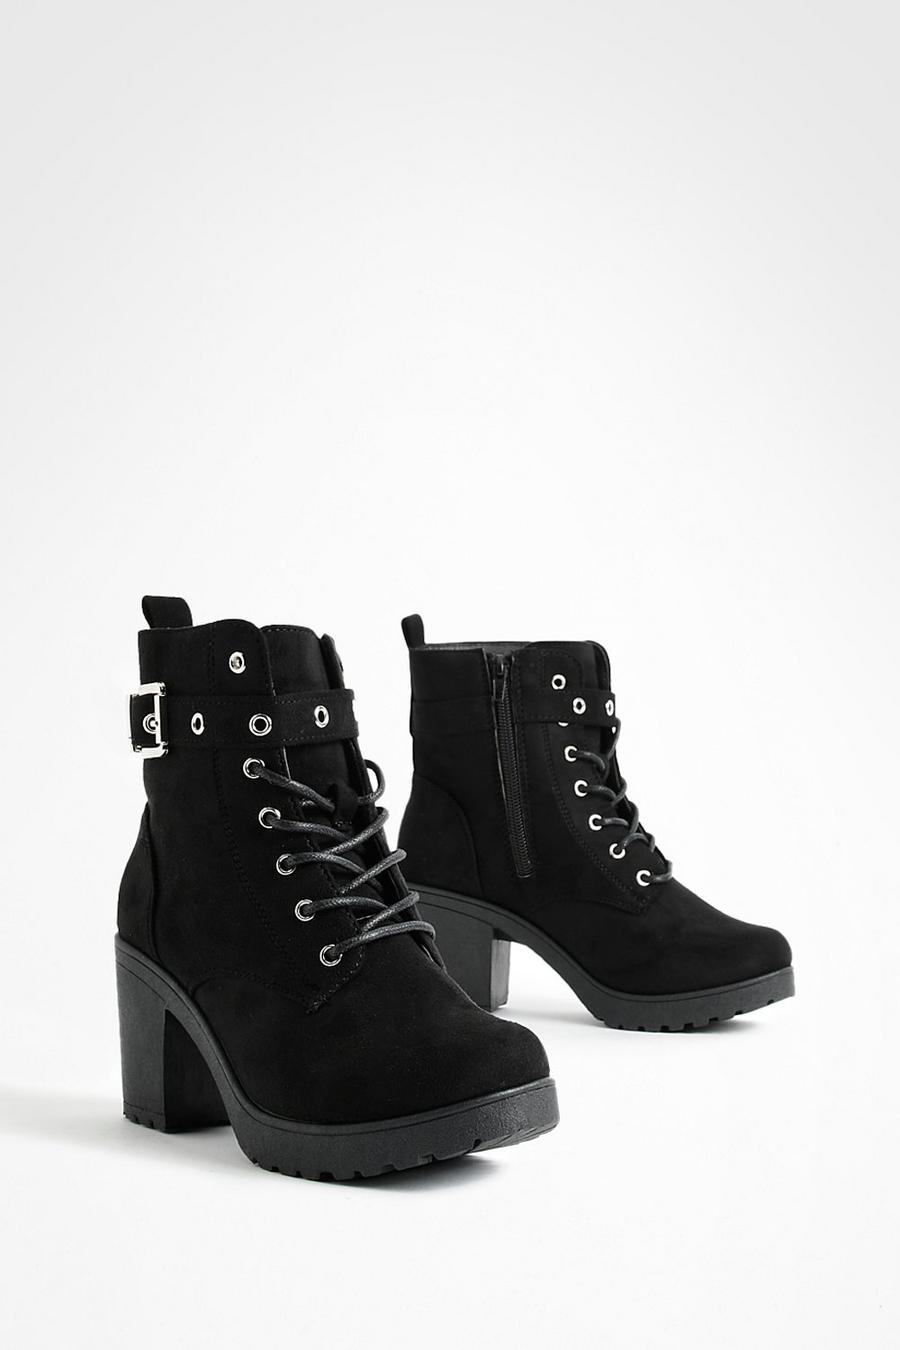 Black noir Wide Fit Buckle Lace Up Chunky Hiker Boots